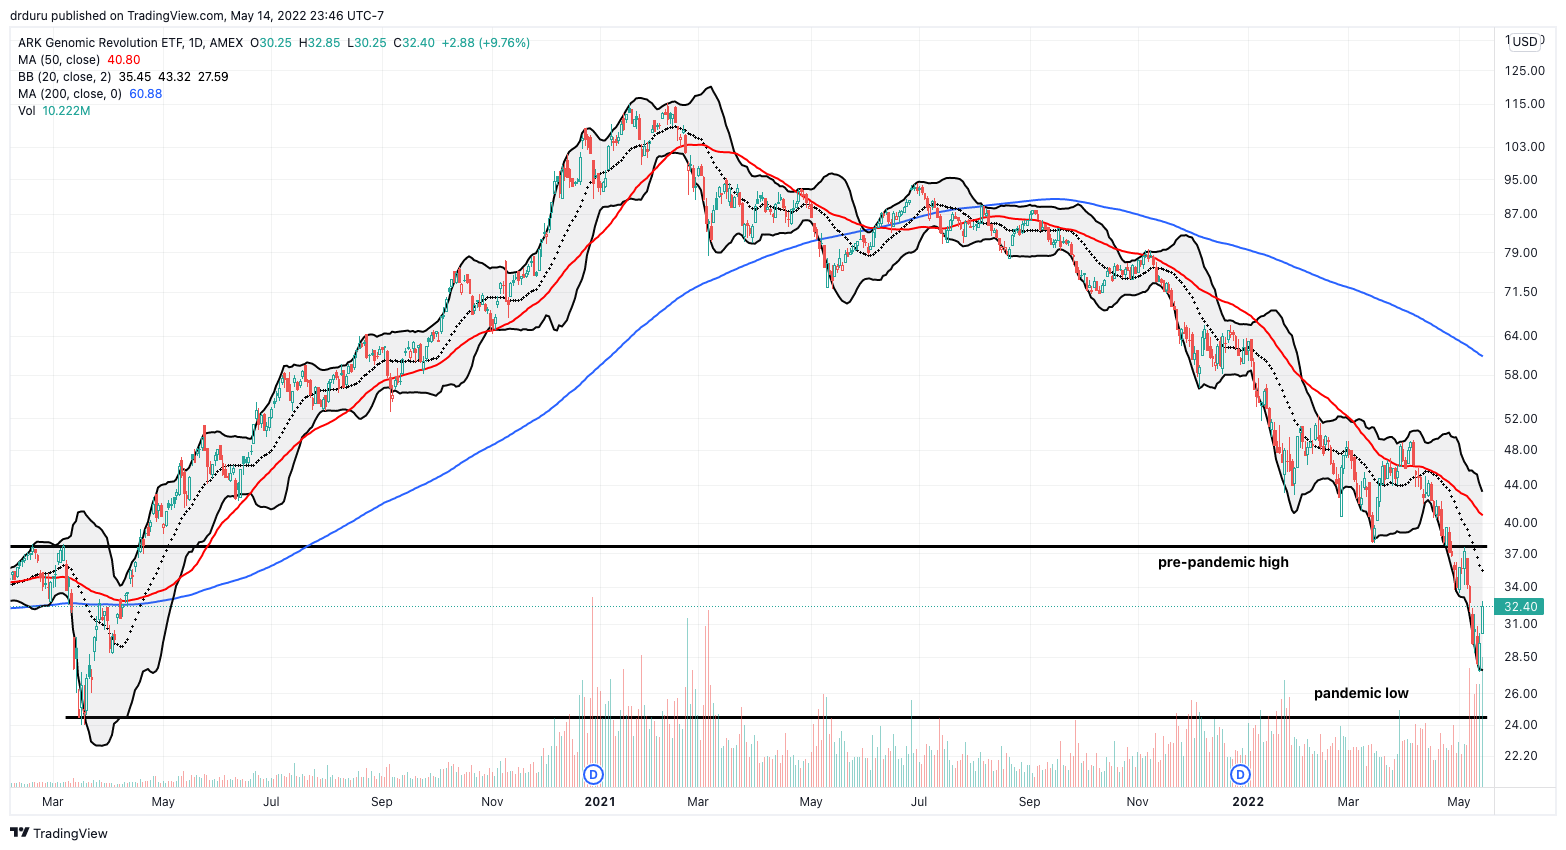 The ARK Genomic Revolution ETF (ARKG) faces formidable overhead resistance levels from its pre-pandemic high and steeply downwardly sloping moving averages.